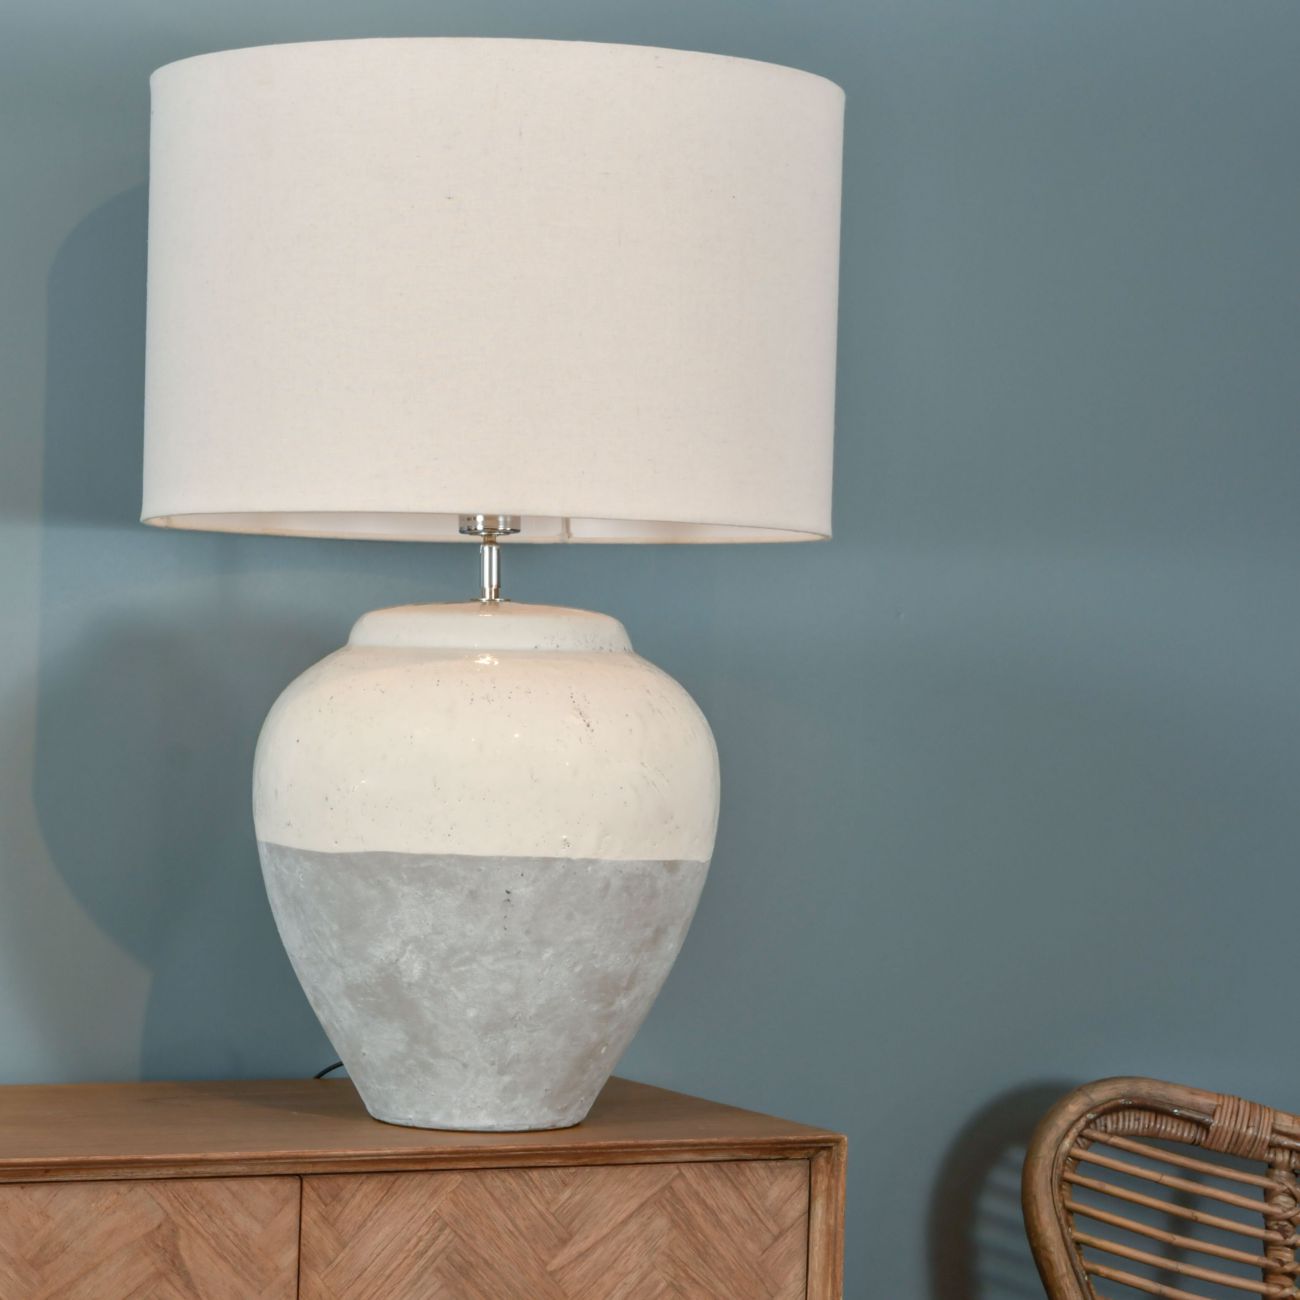 Skyline Grey Porcelain Table Lamp with Shade